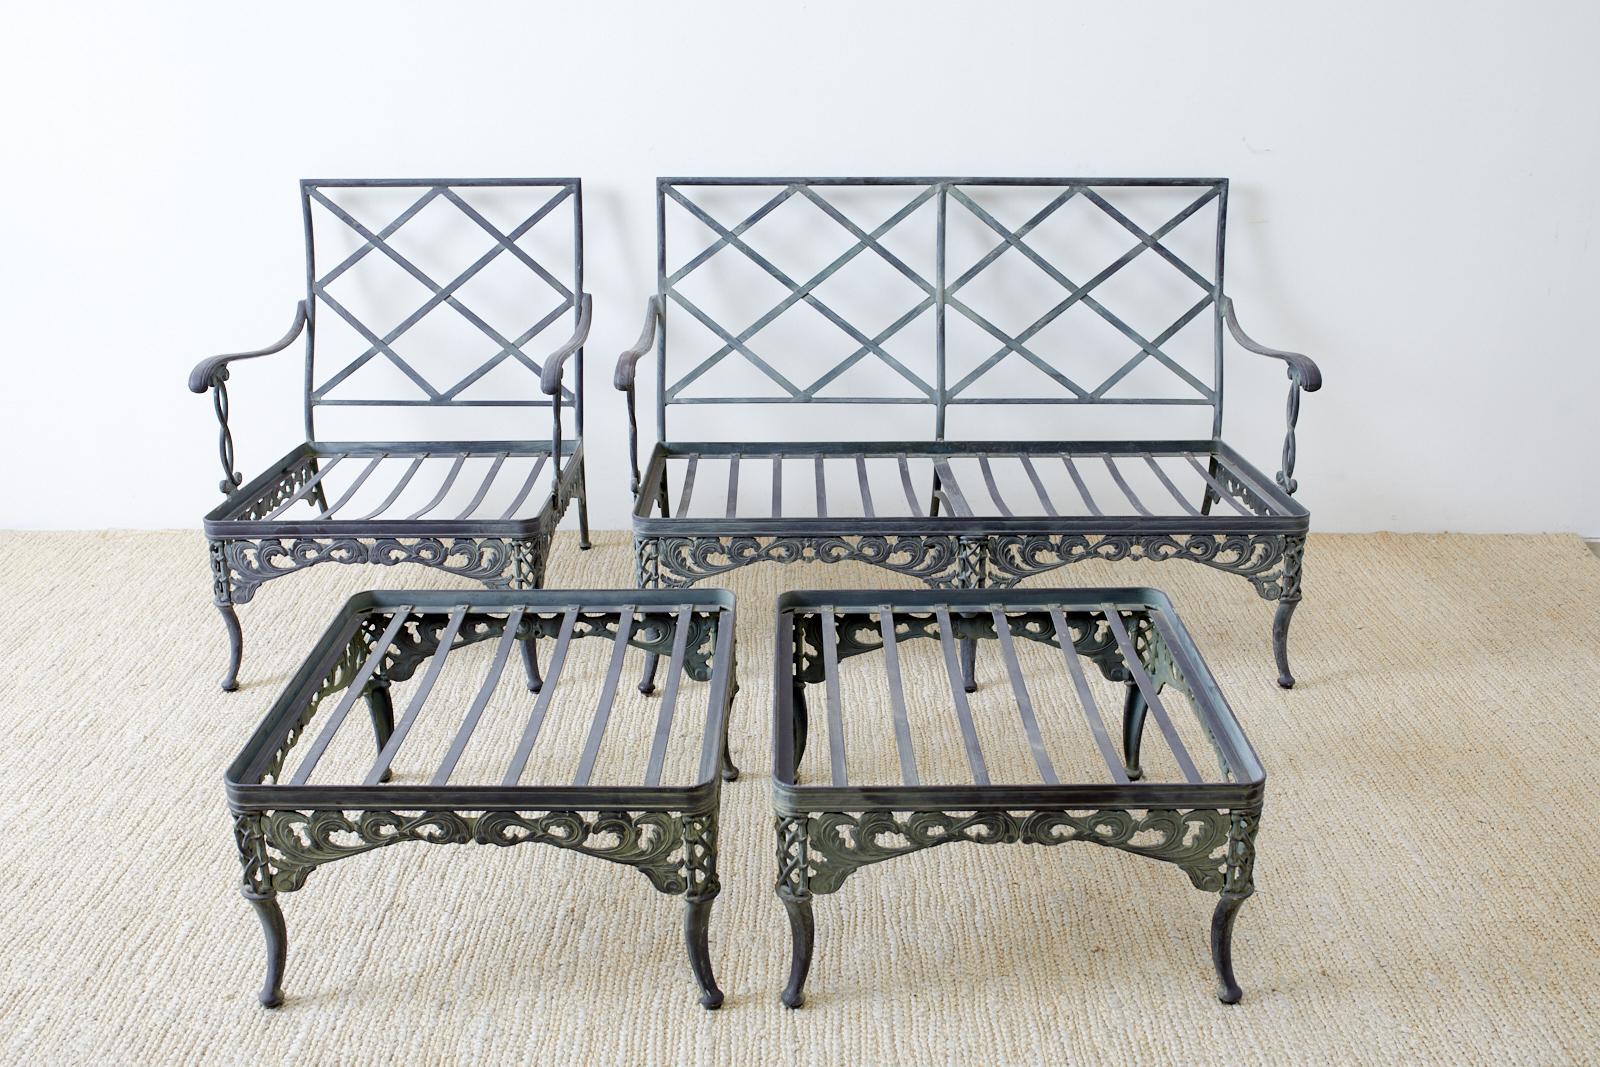 Group of four neoclassical style garden patio set including a settee, lounge chair, and two ottomans. Known as the Florentine design made by Brown Jordan from finely crafted aluminum with a beautifully aged finish and verdigris patina. The settee